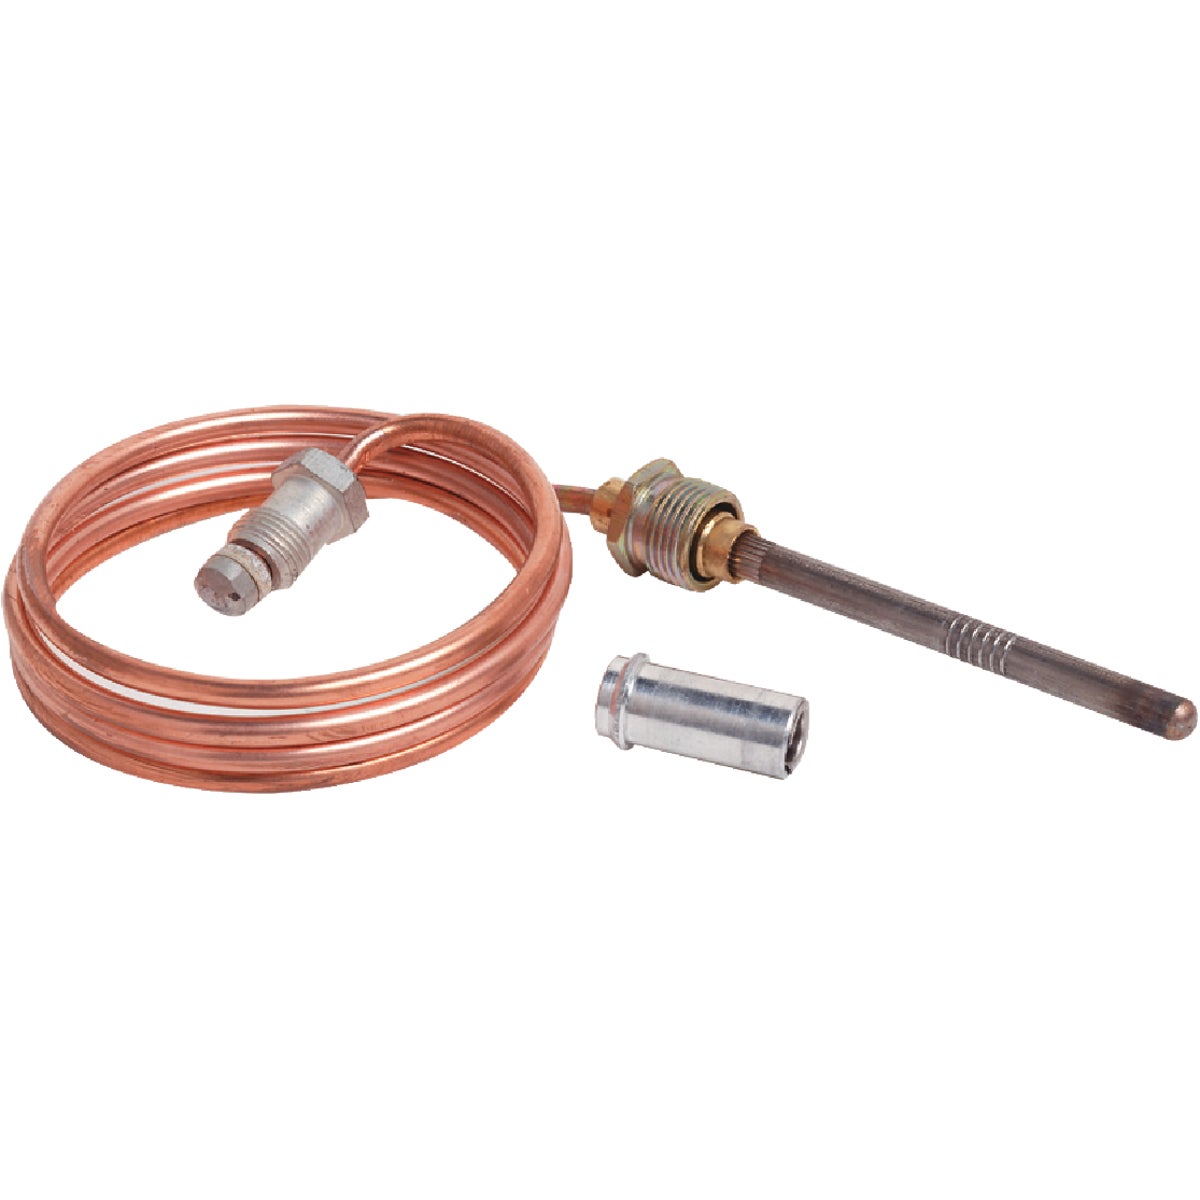 Resideo 30 In. 30mV Universal Thermocouple